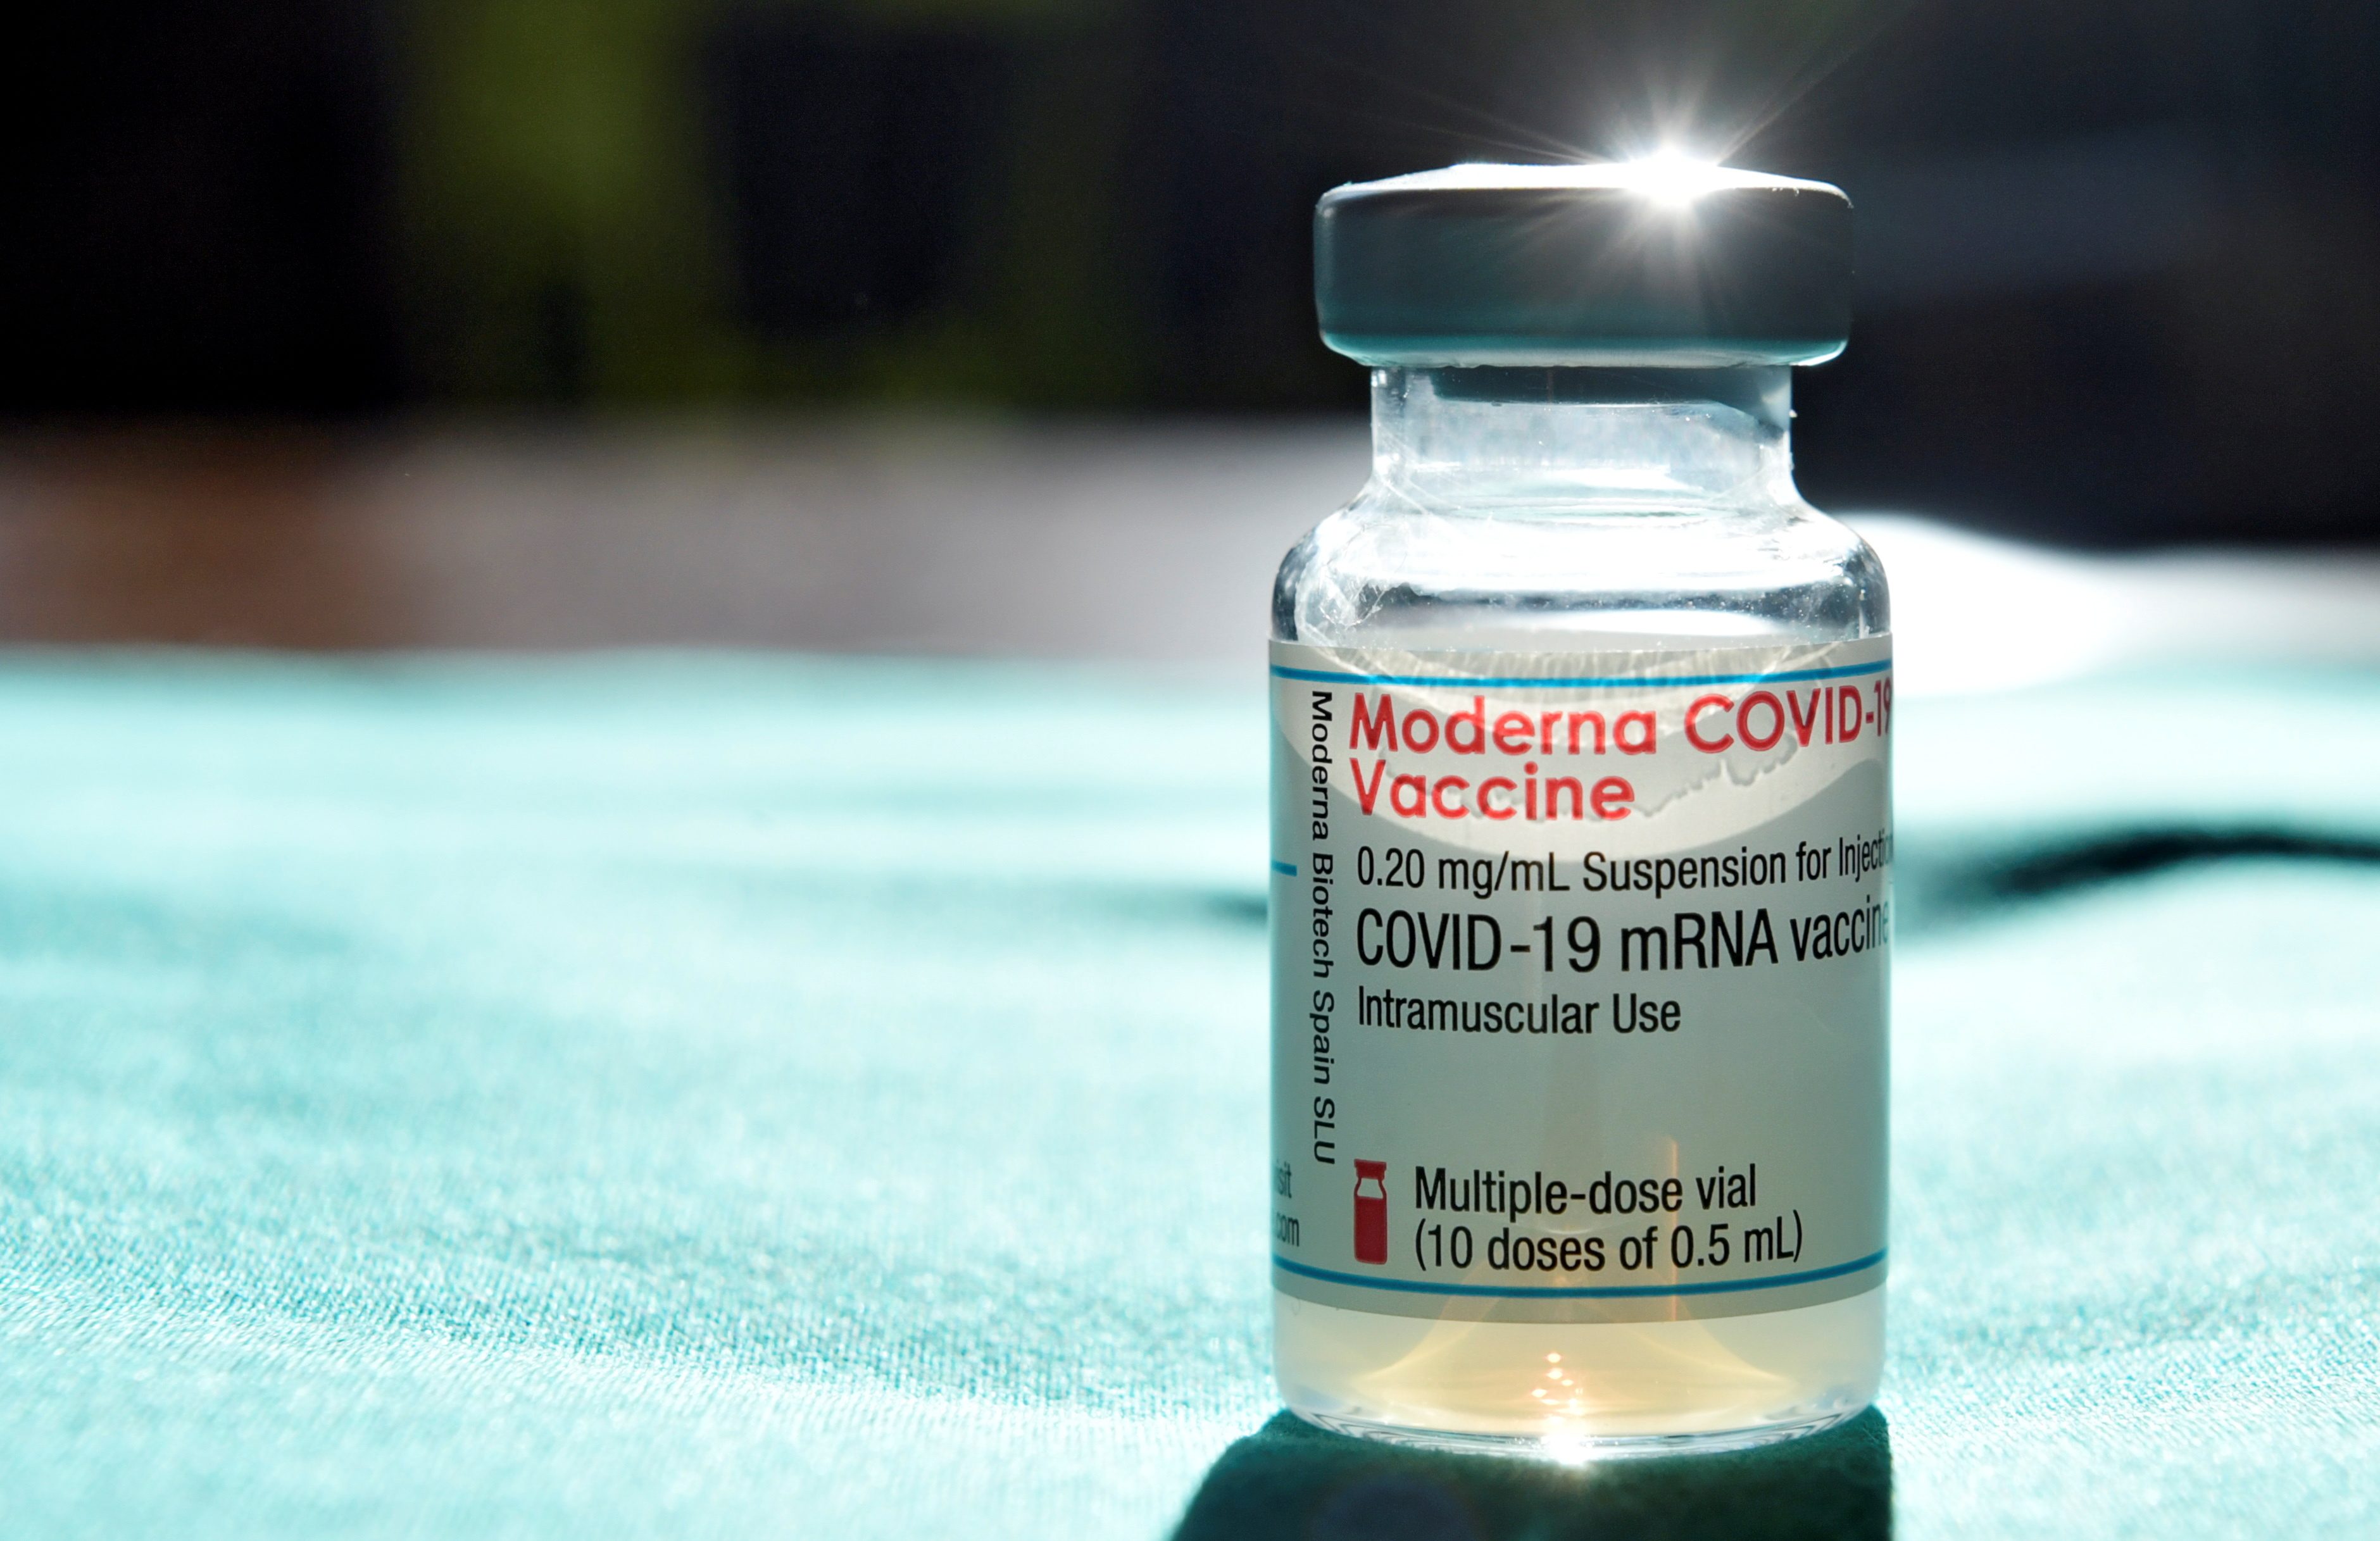 WHO experts issue recommendations on Moderna COVID-19 vaccine